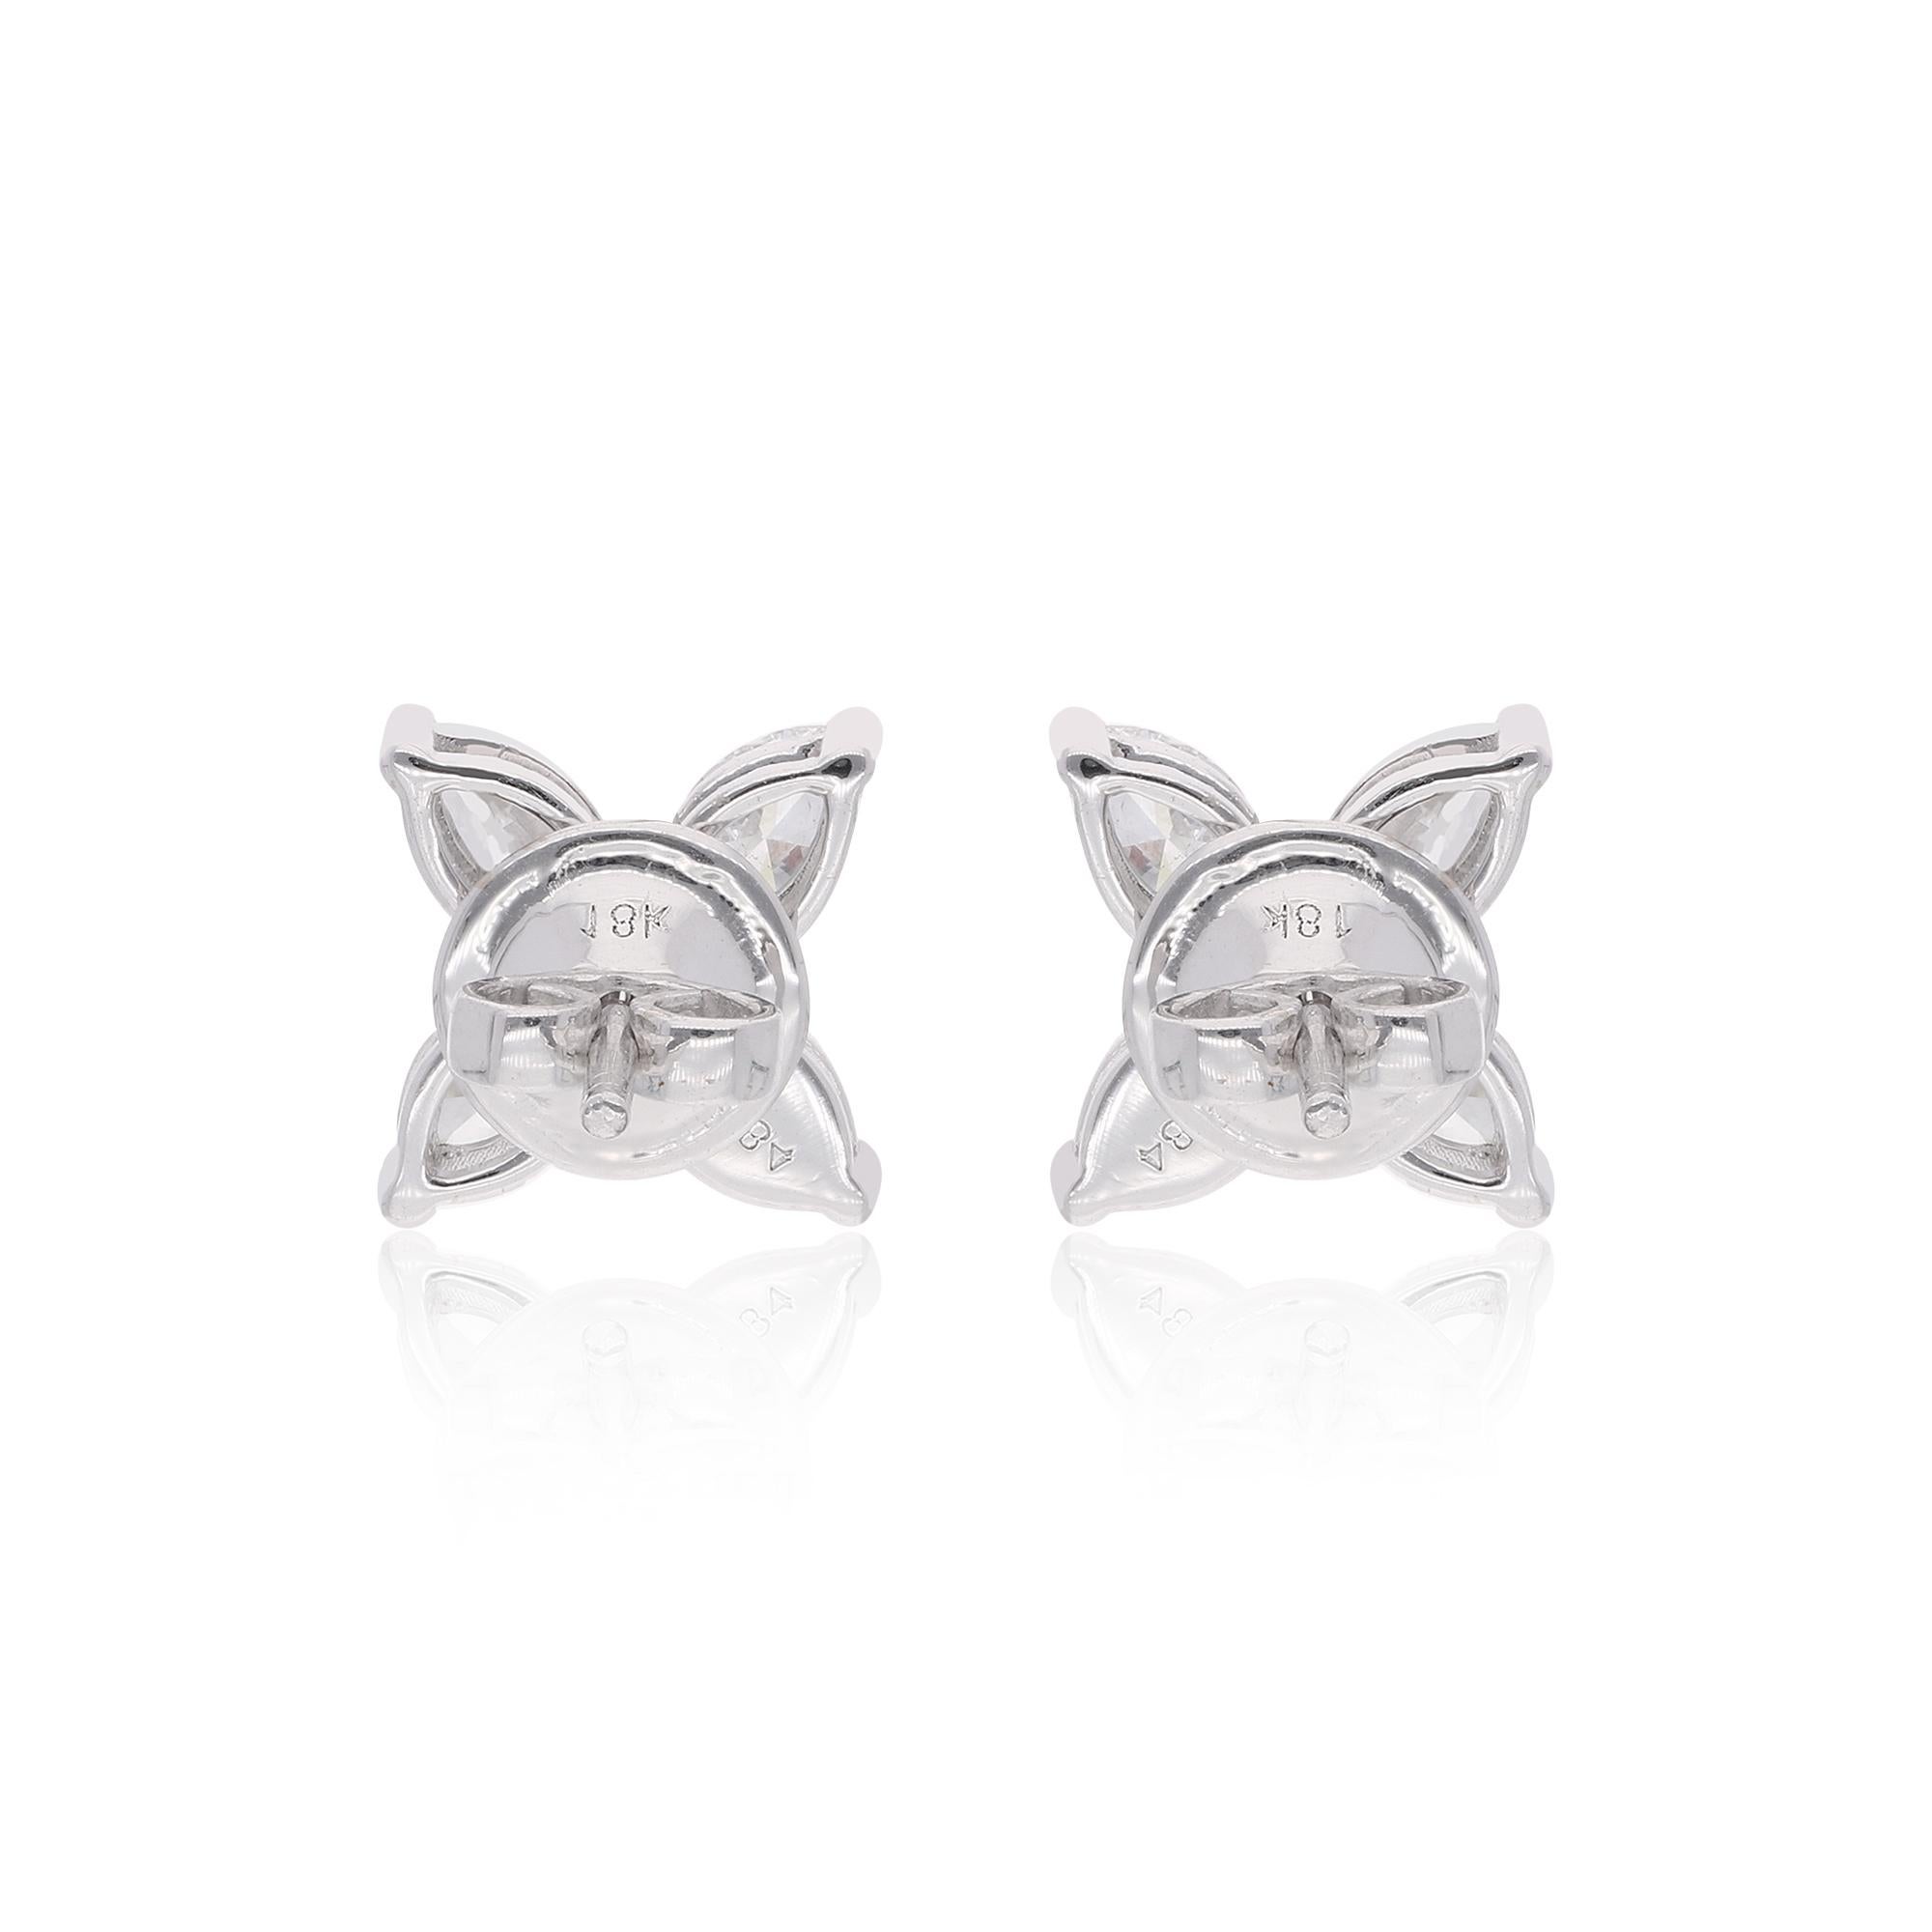 Modern 1.6 Carat SI Clarity HI Color Marquise Diamond Stud Earrings 18 Karat White Gold For Sale